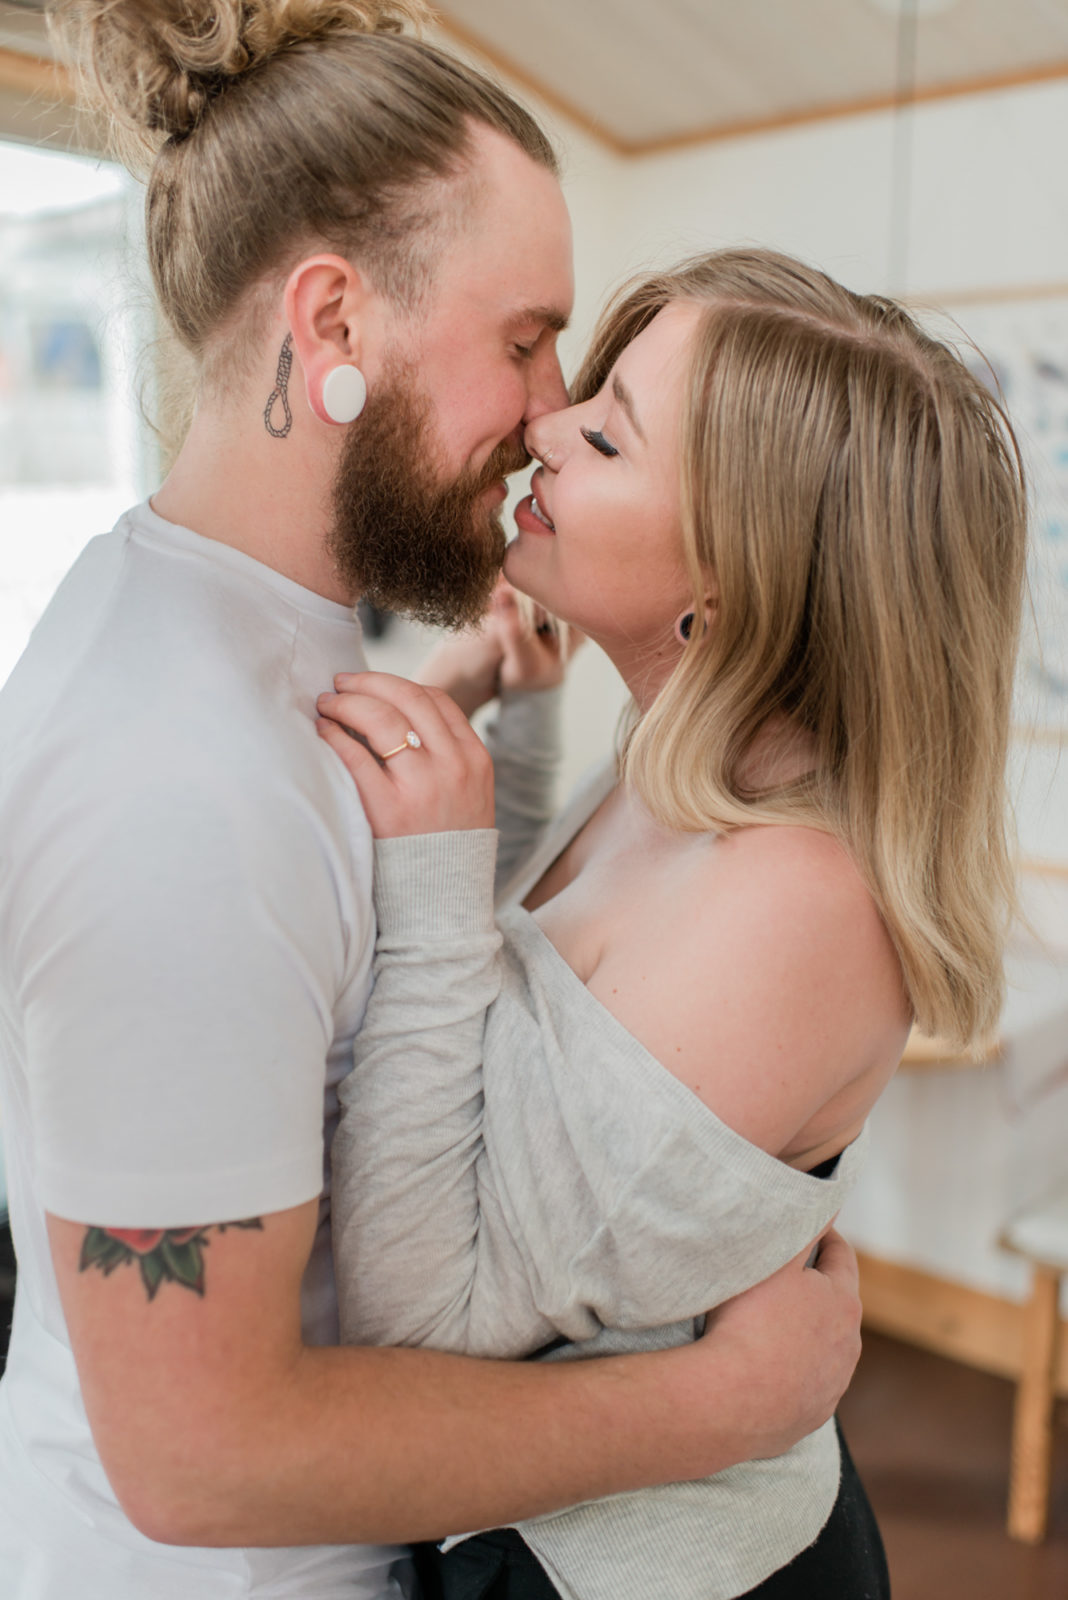 6 Tips All About Choosing Outfits For Your Engagement Session - Pro Tip from Kaity Body